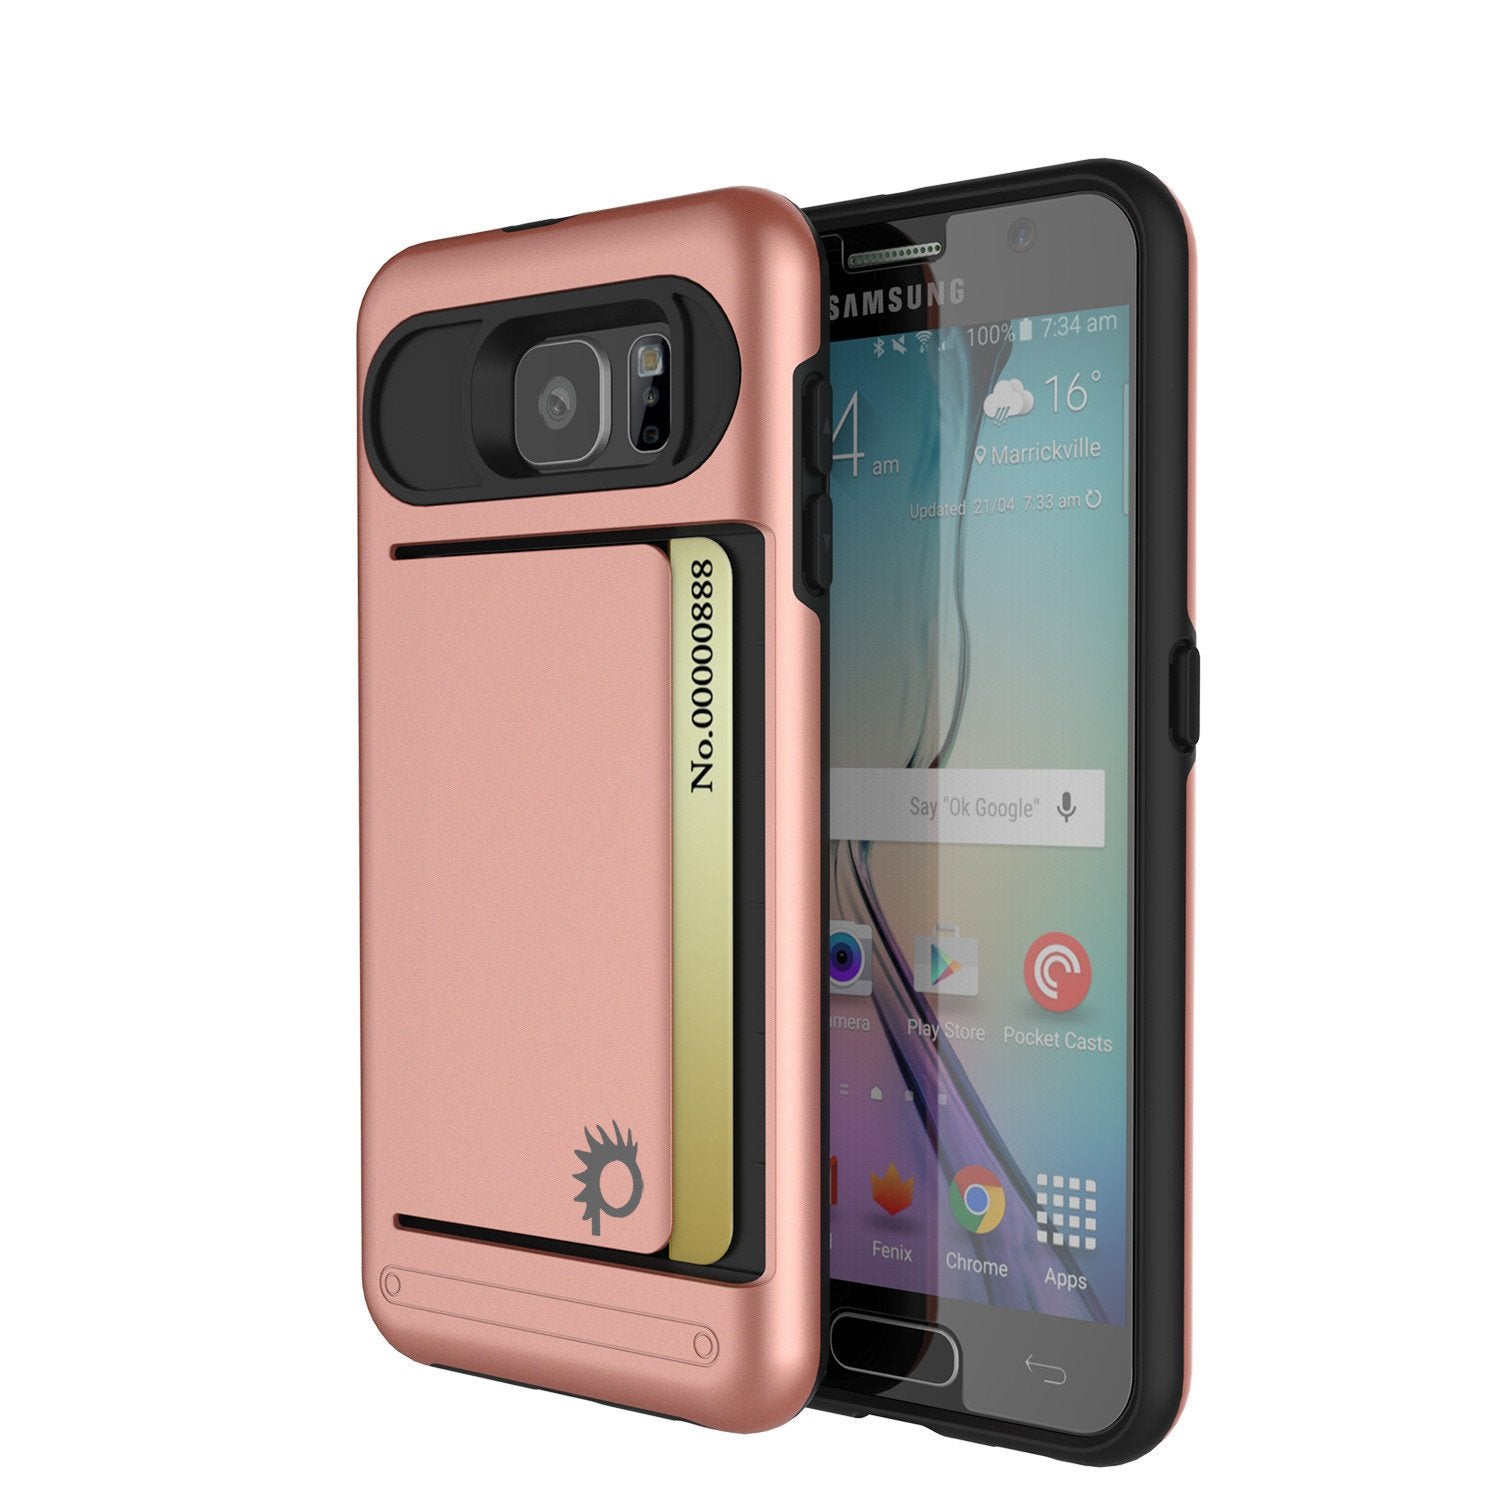 Galaxy S6 EDGE Plus Case PunkCase CLUTCH Rose Gold Series Slim Armor Soft Cover w/ Screen Protector - PunkCase NZ